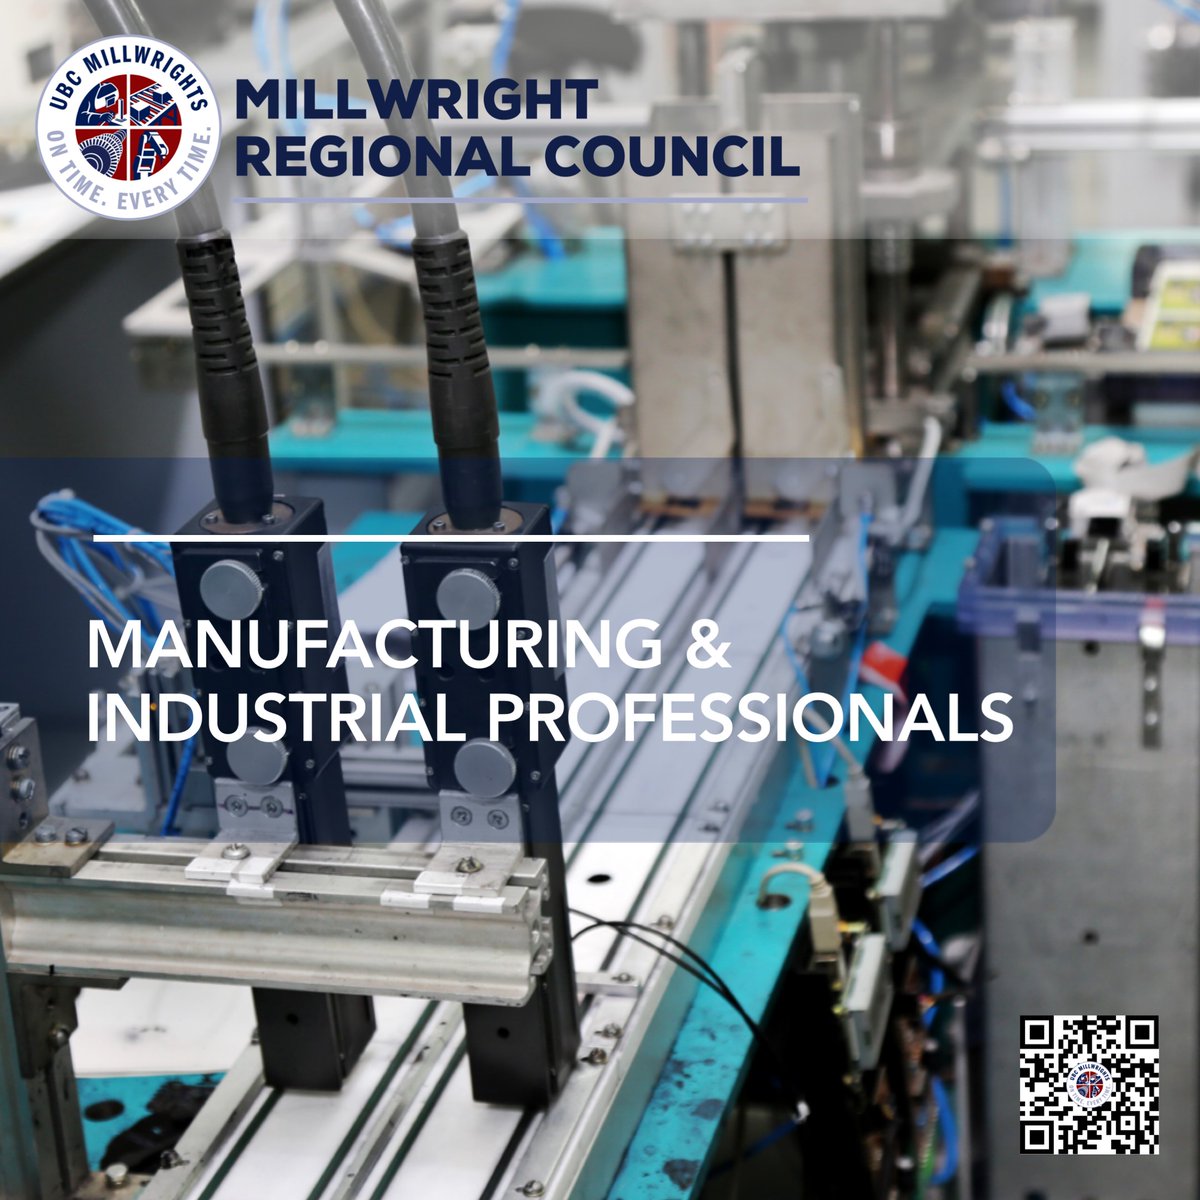 Maintaining an efficient operation requires a partner with the commitment, drive, and passion to deliver excellence – no matter the challenge. At the MRC, we provide professional Millwrights and bring together vast industry knowledge with skills to help our customers succeed.